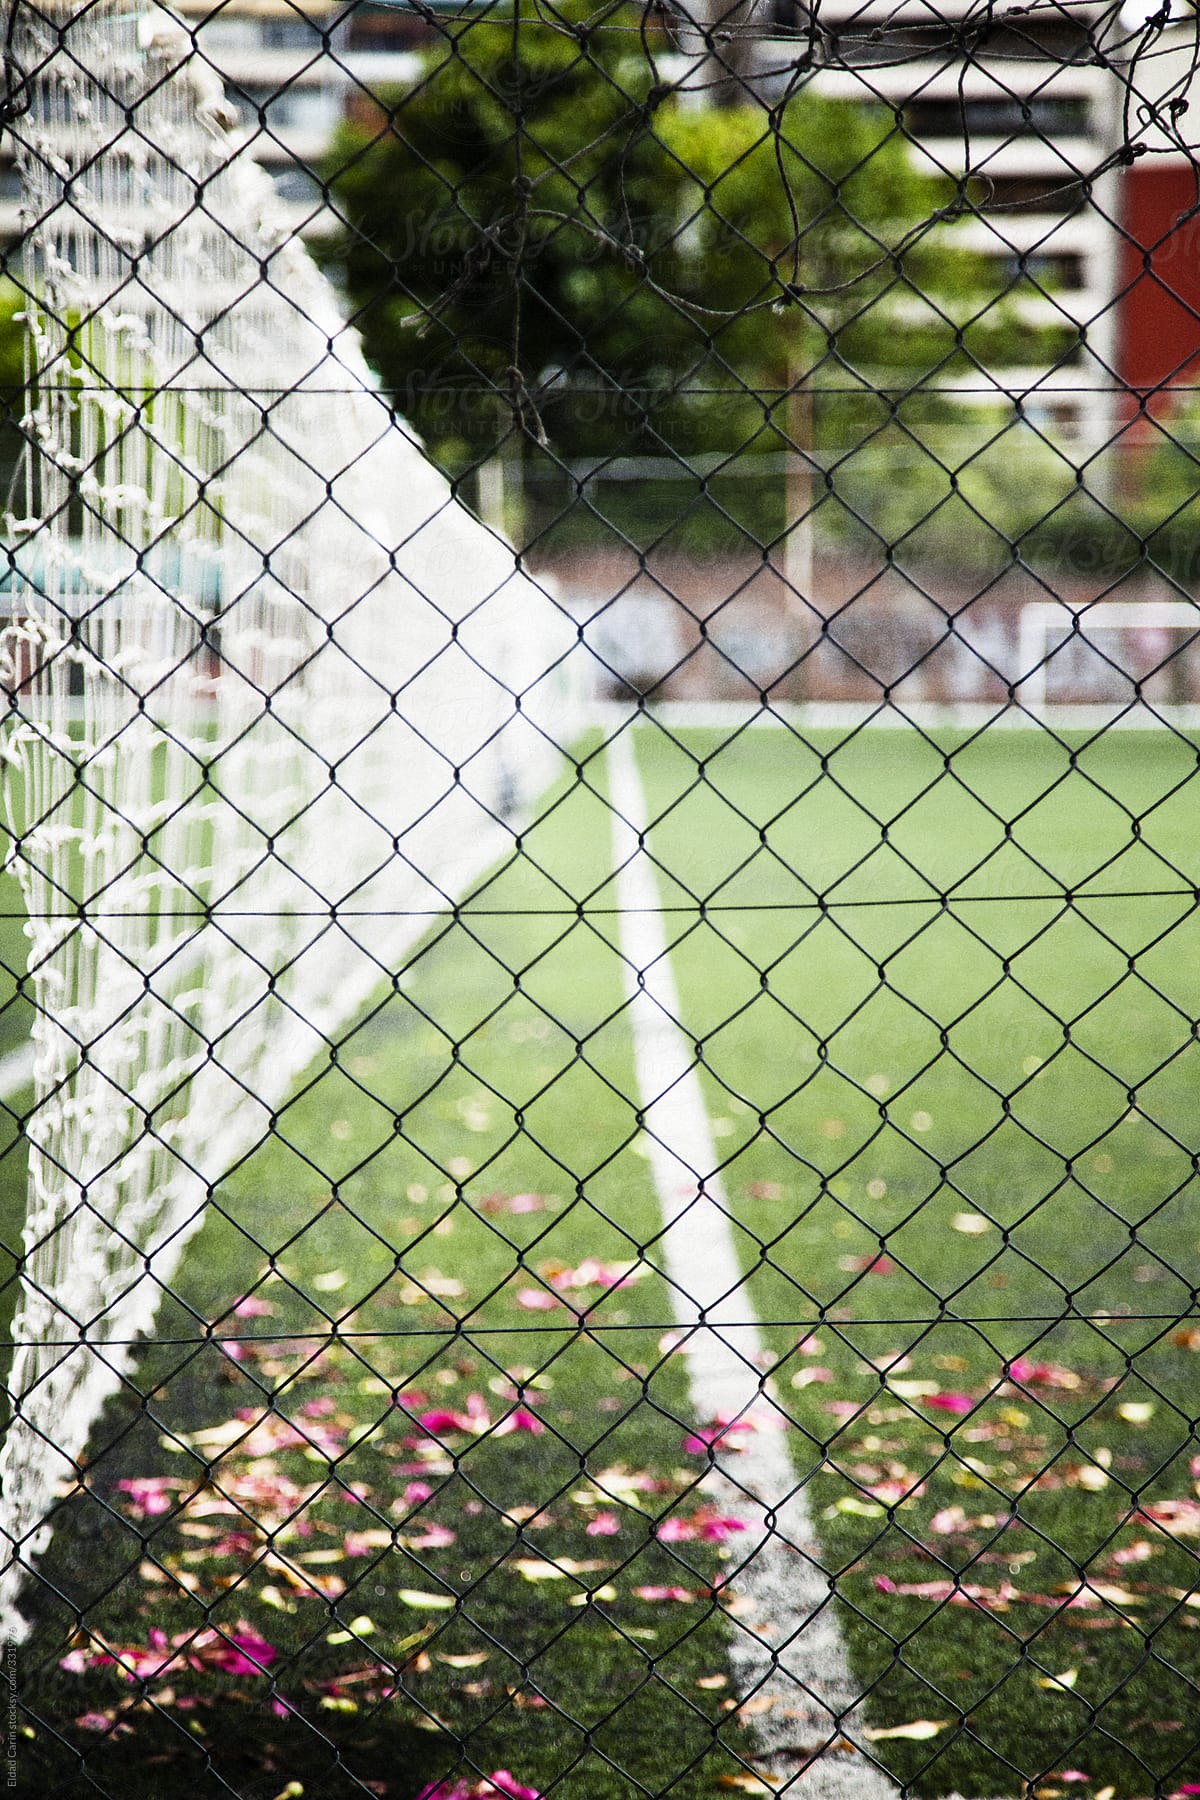 Netted Fences and Urban Soccer Court